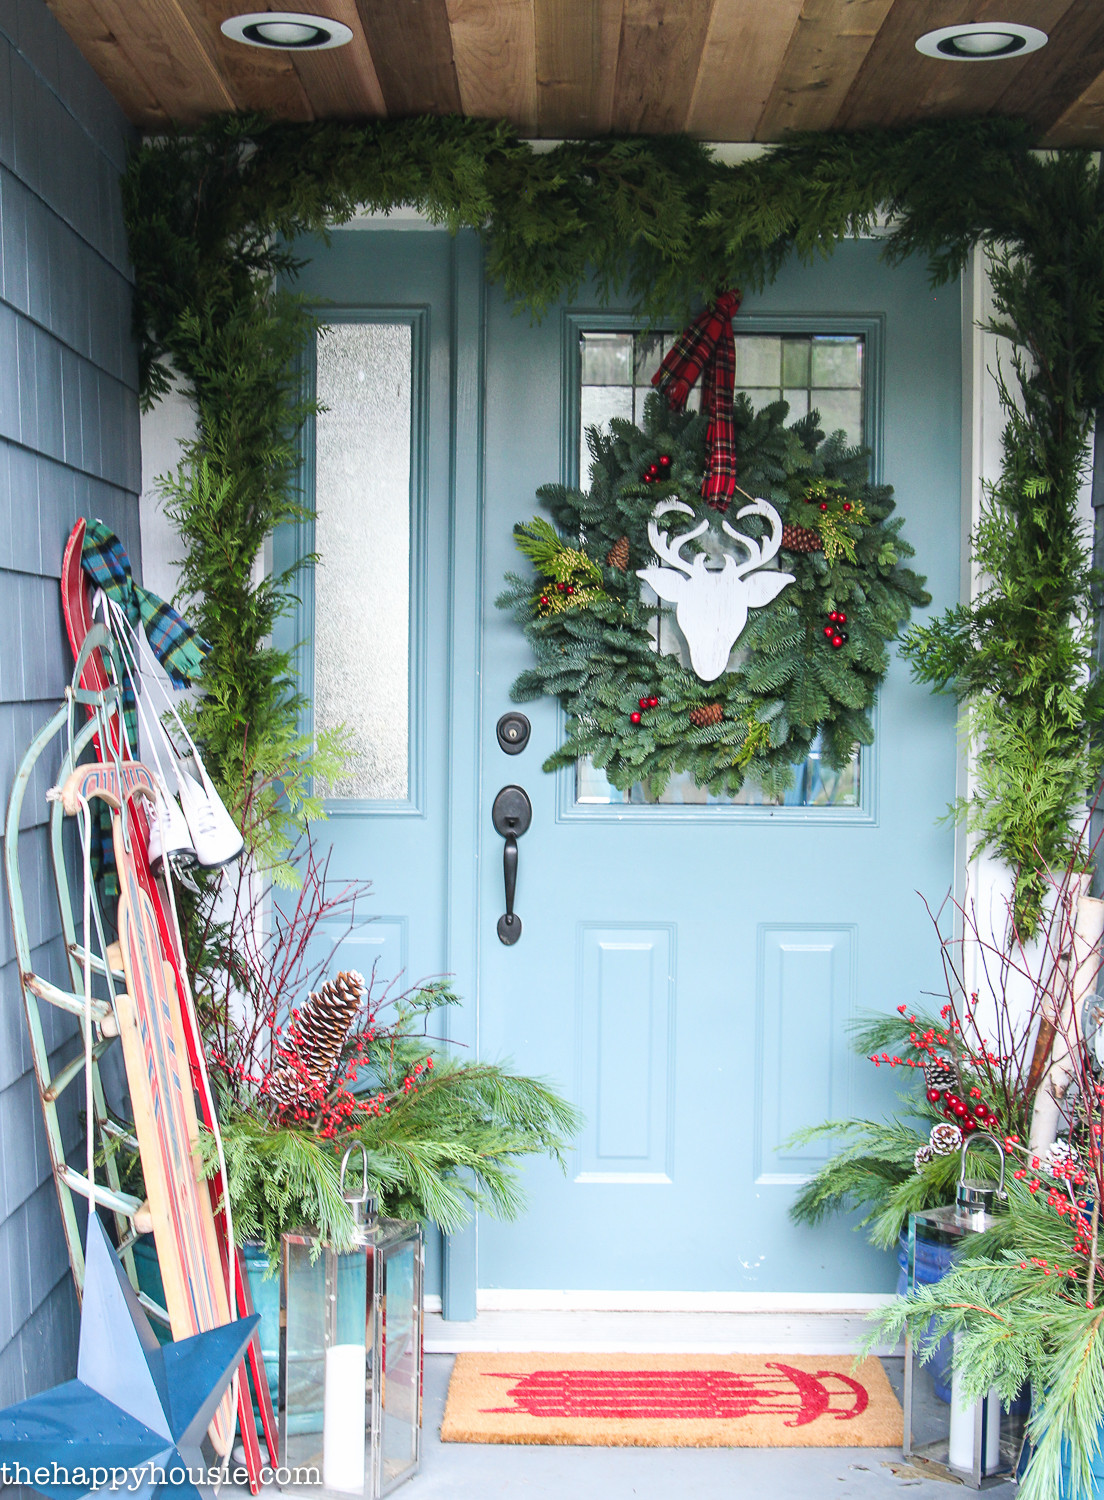 Decorating Front Porch For Christmas
 Thrifty & Classic Christmas Front Porch Decor